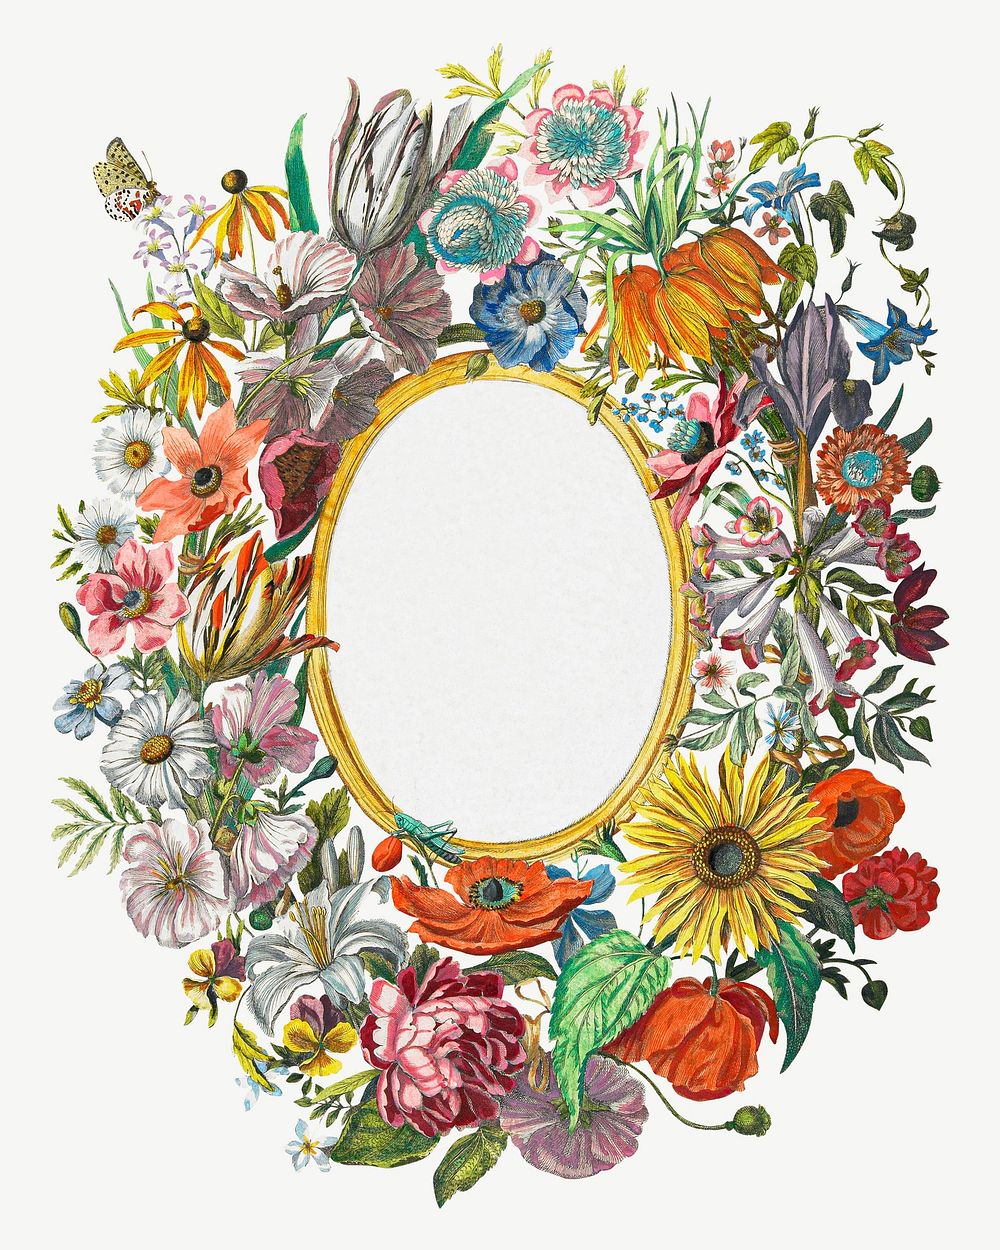 Vintage floral frame chromolithograph art psd. Remixed by rawpixel. 